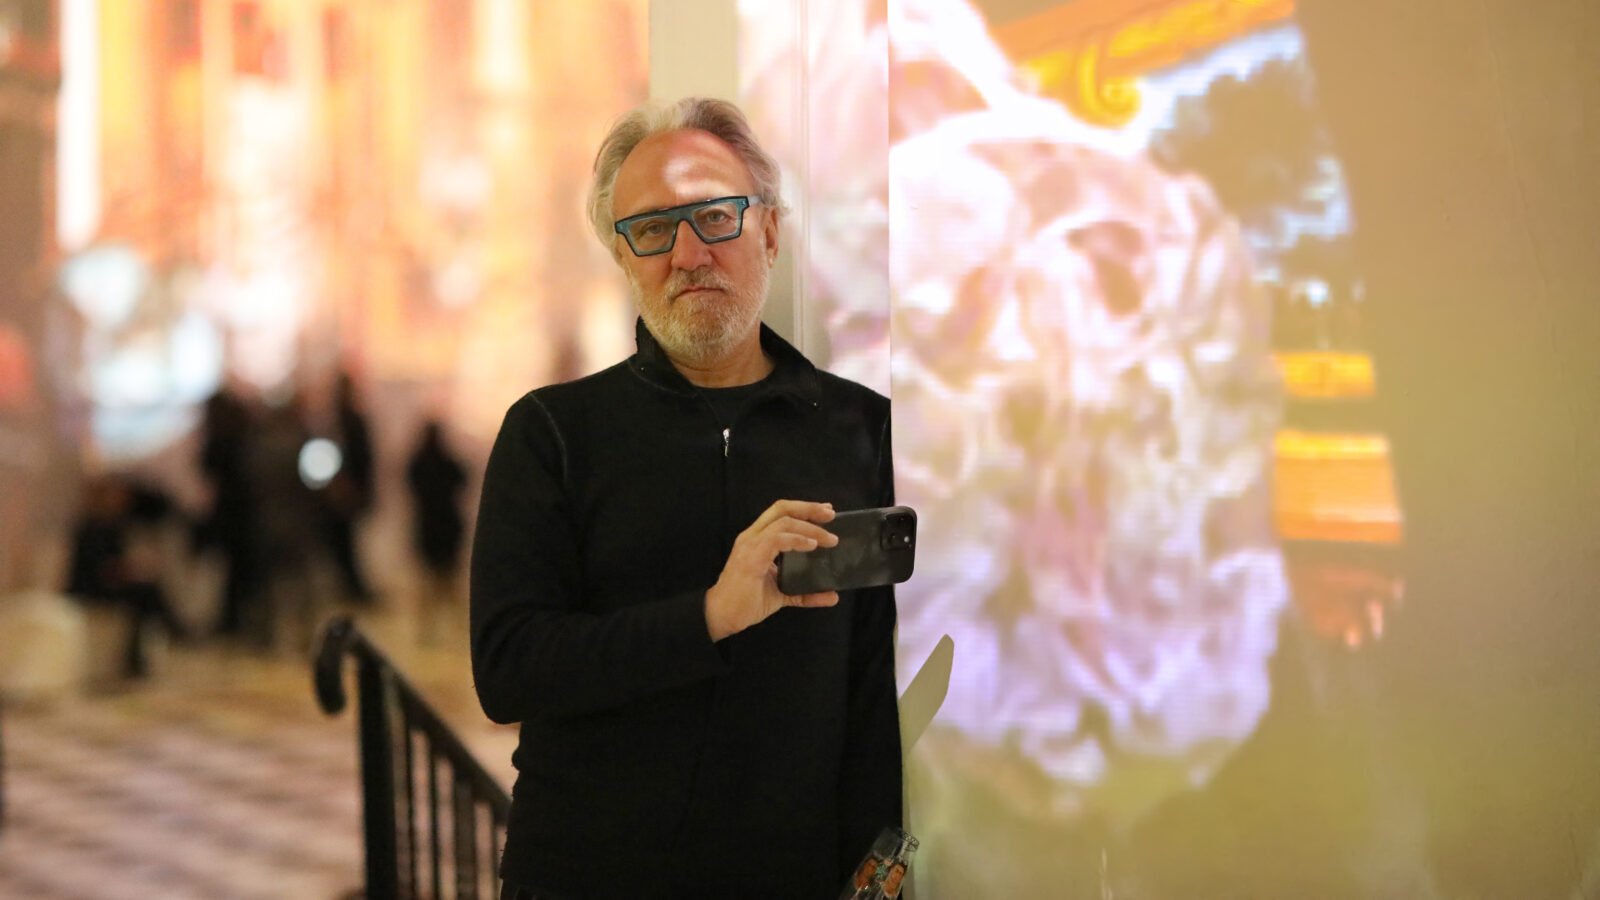 Massimilliano Siccardi, the artist behind the Immersive Mozart exhibit, explores the installation